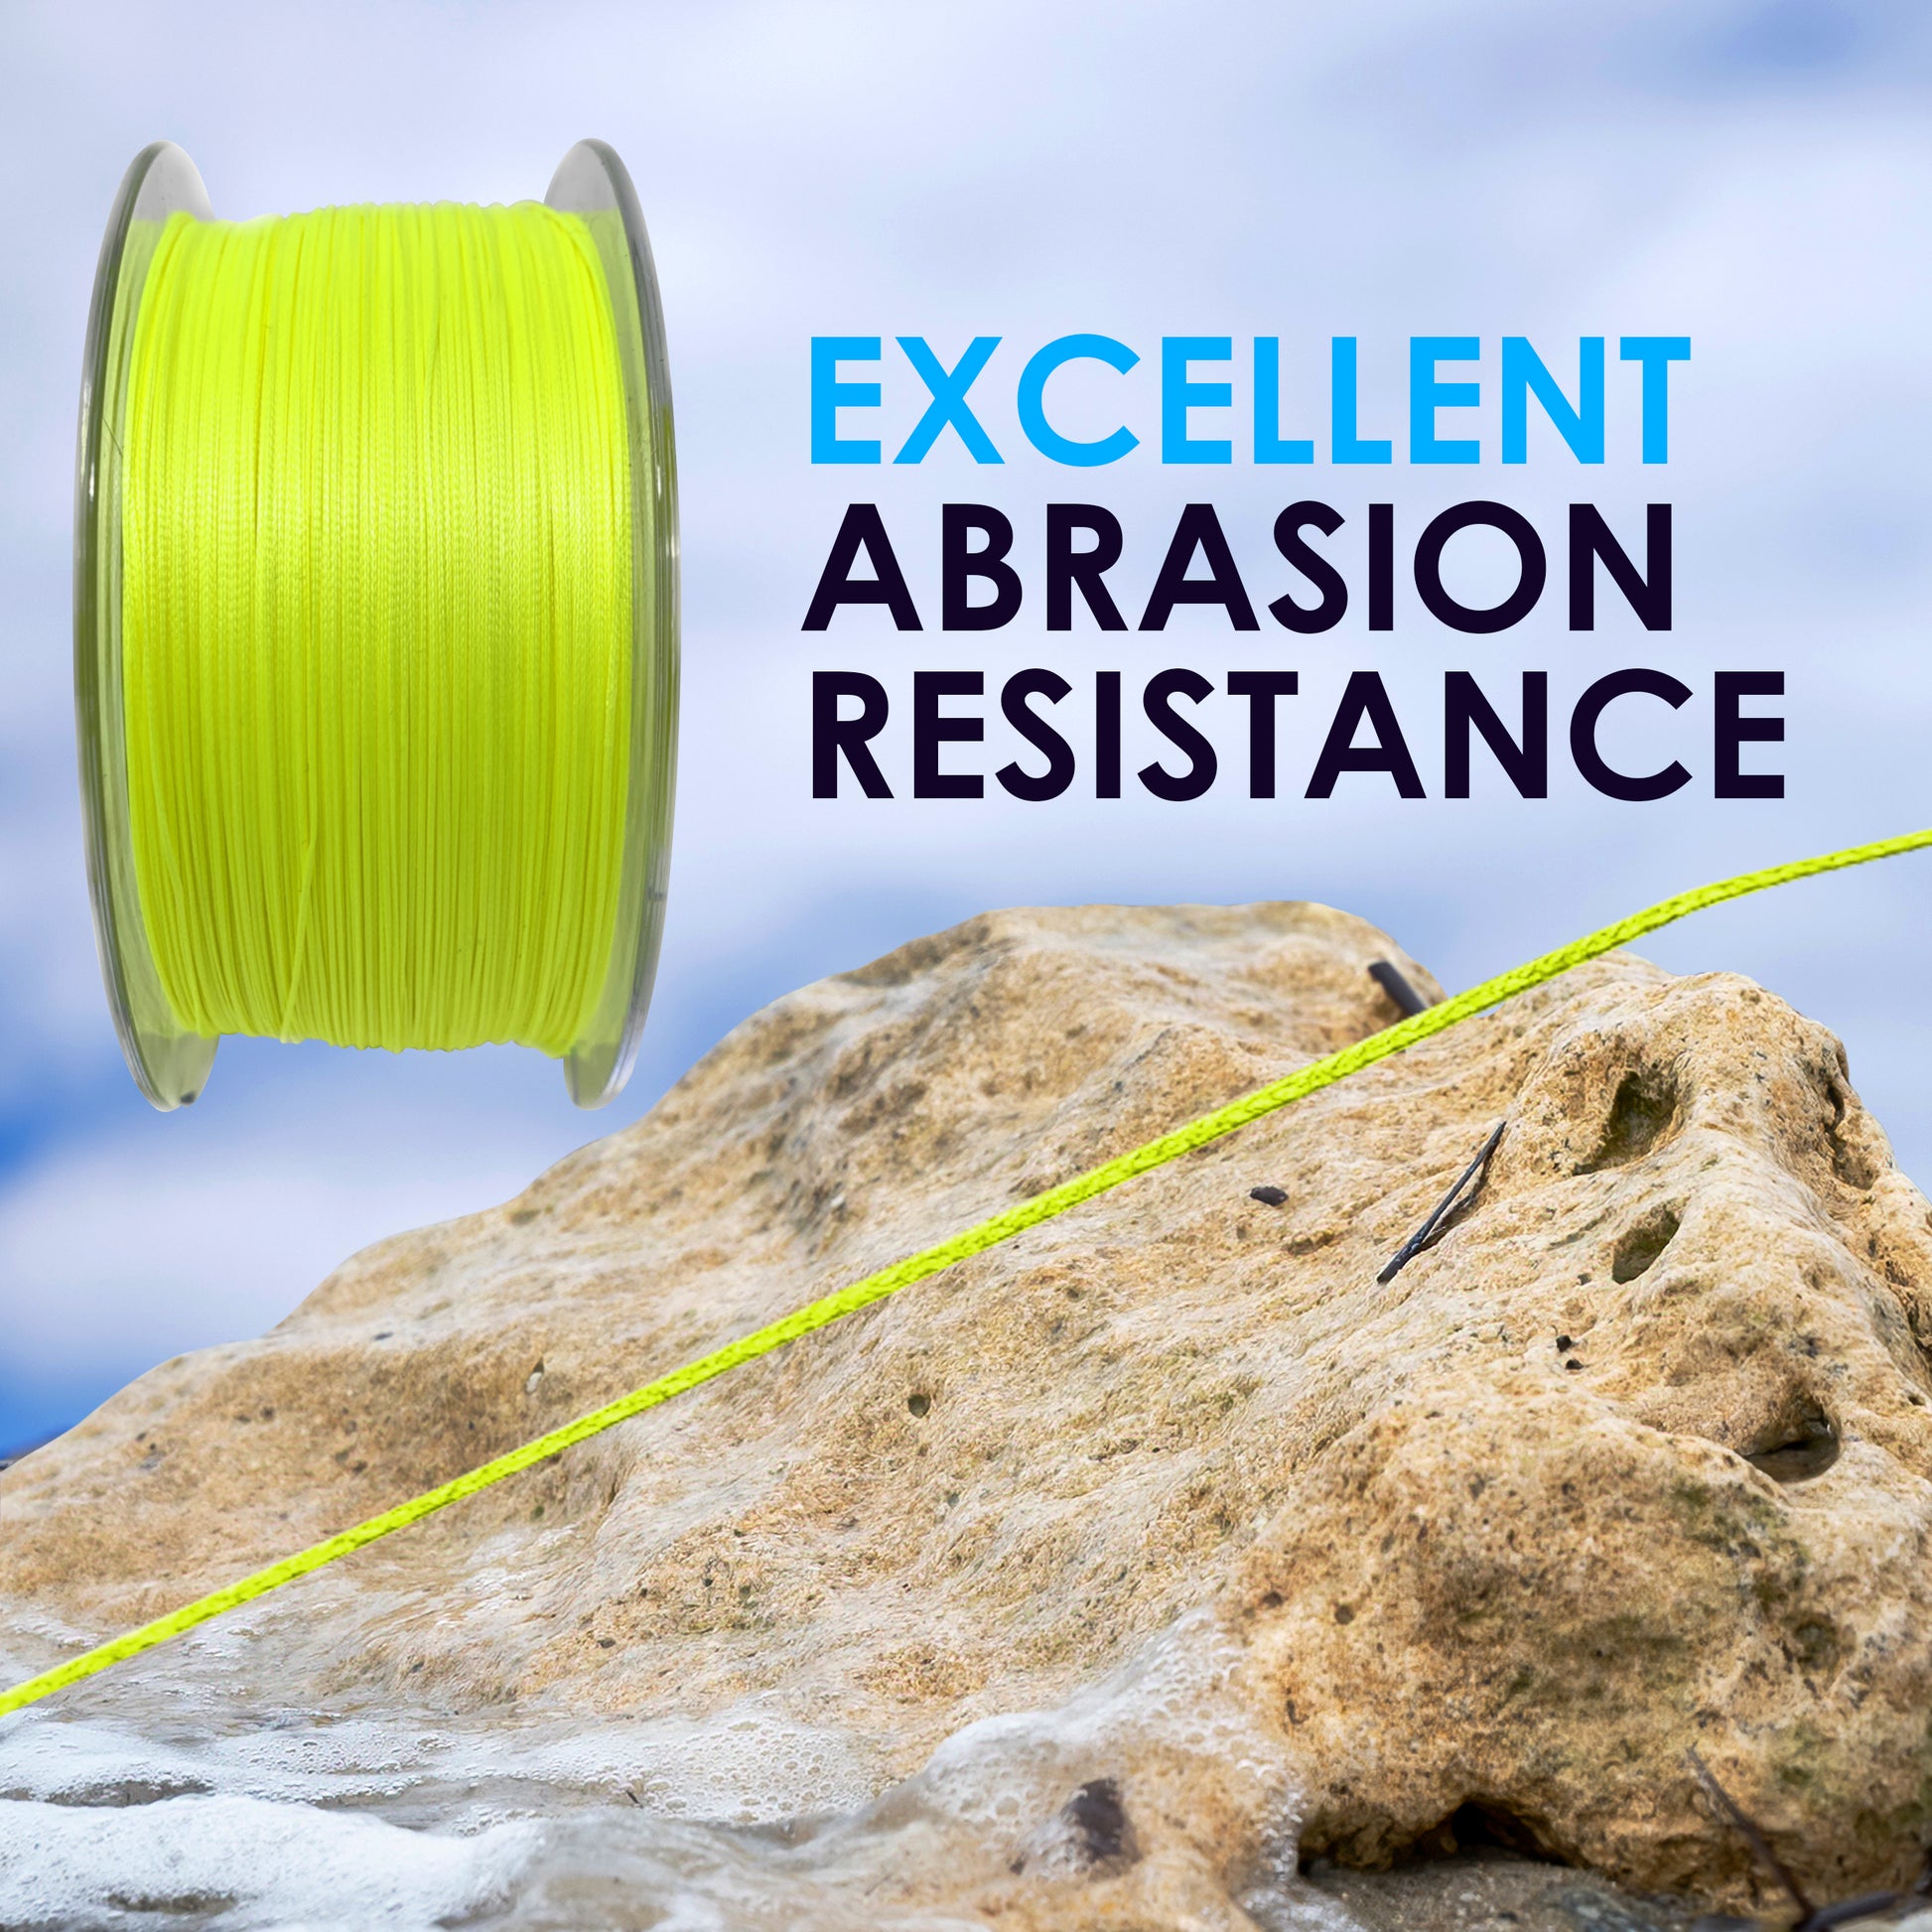 Reaction Tackle Hollow Core, 16 Strand Braided Fishing Line White - 50LB /  500yds : : Sports, Fitness & Outdoors